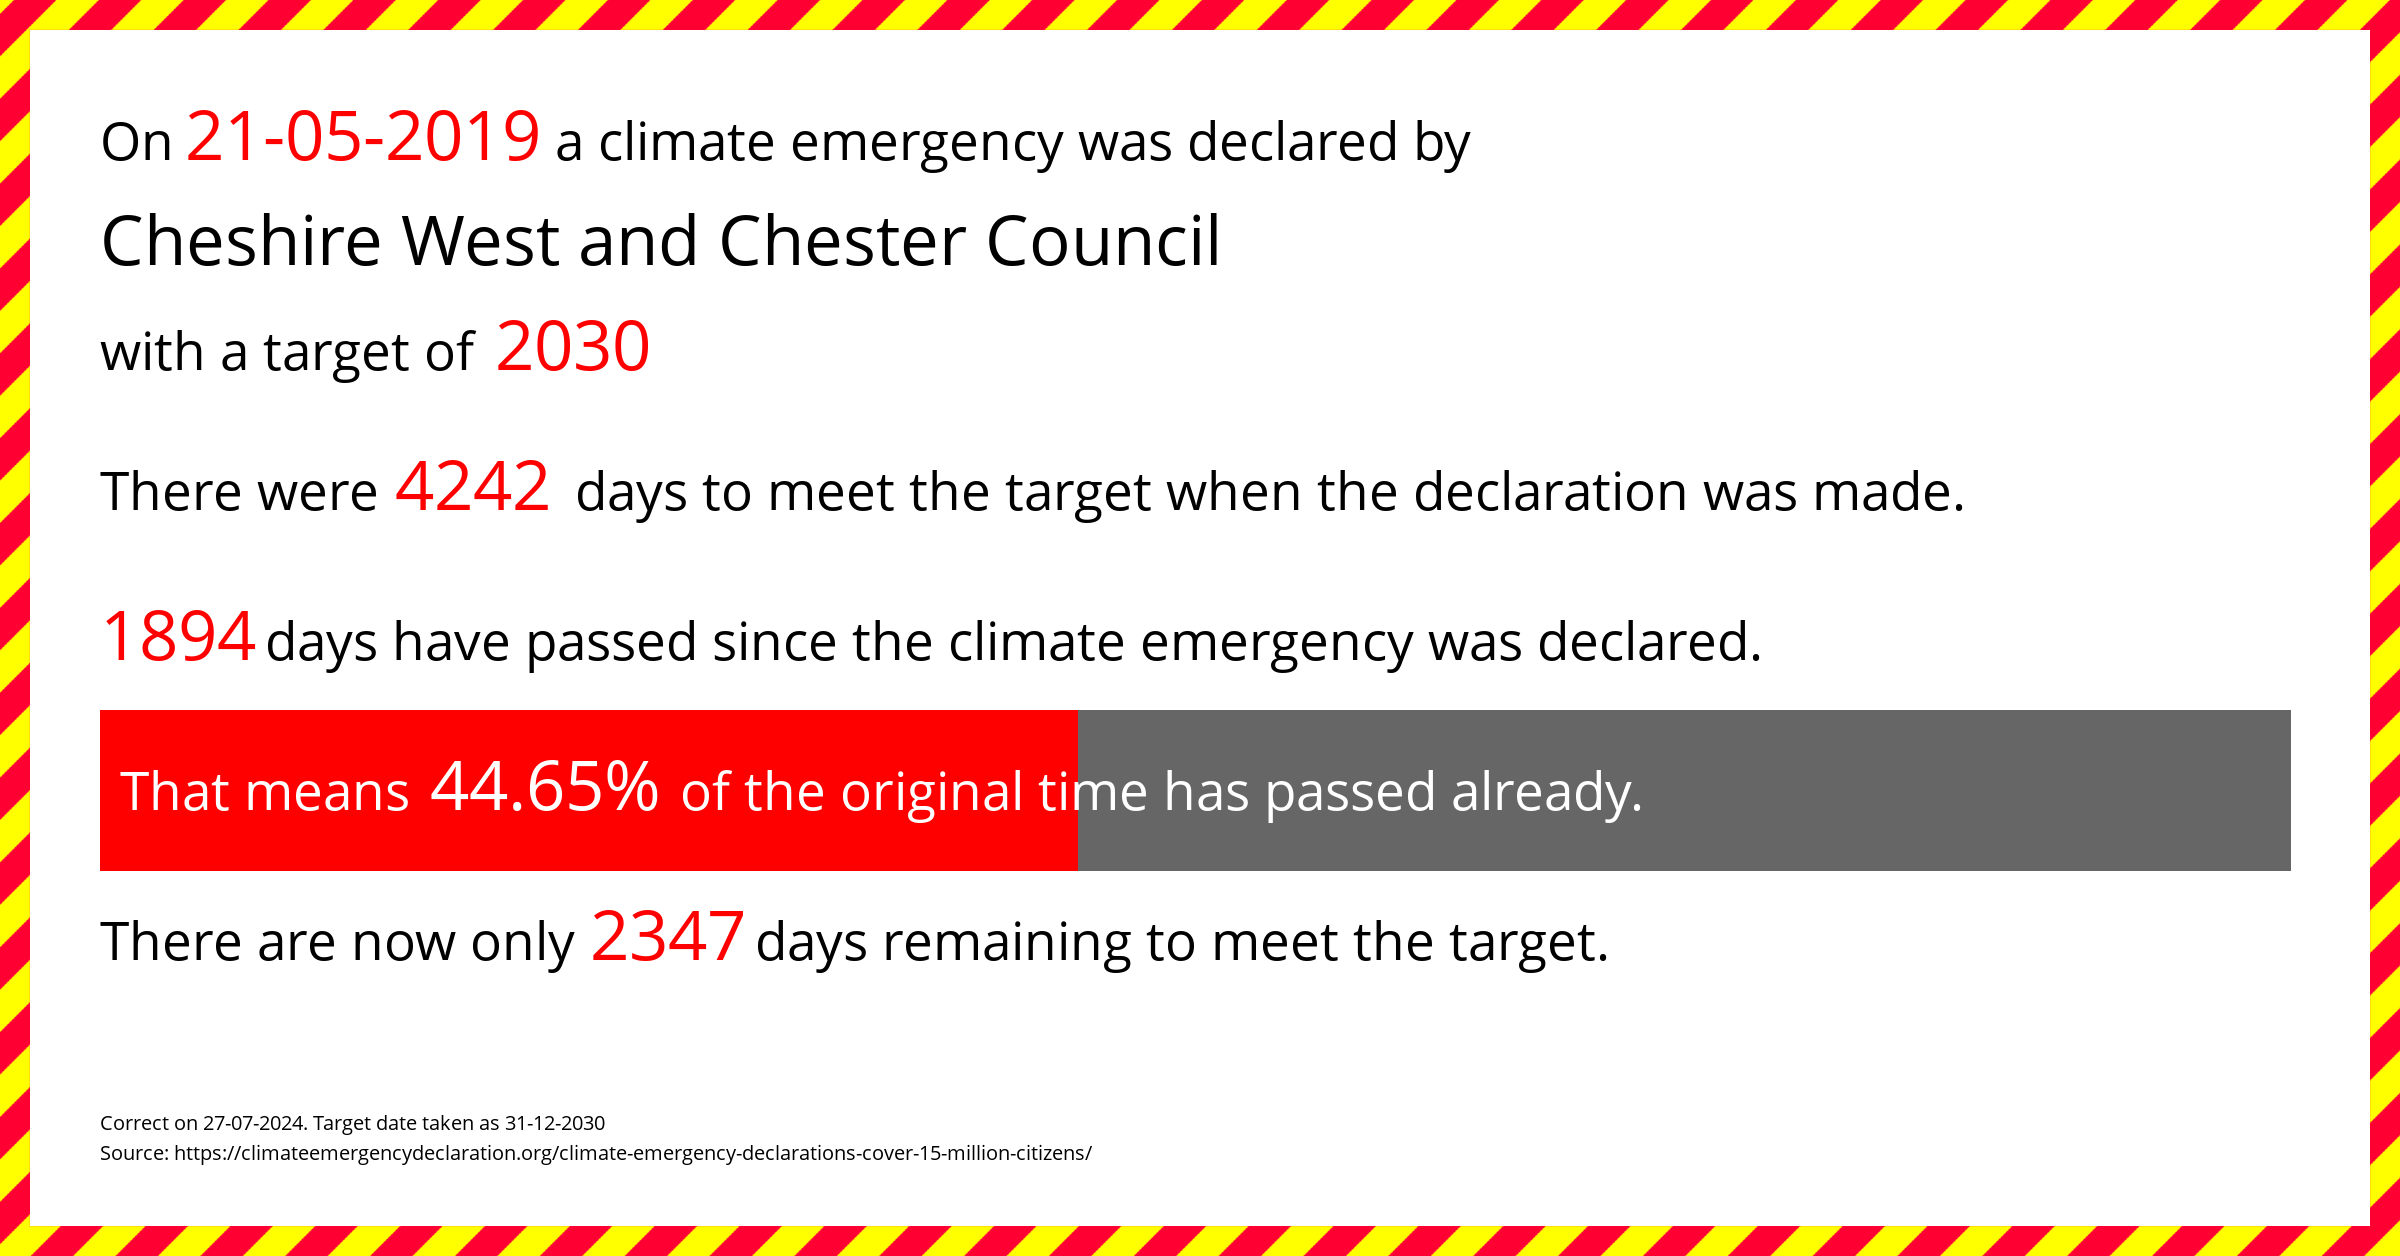 Cheshire West and Chester Council declared a Climate emergency on Tuesday 21st May 2019, with a target of 2030.